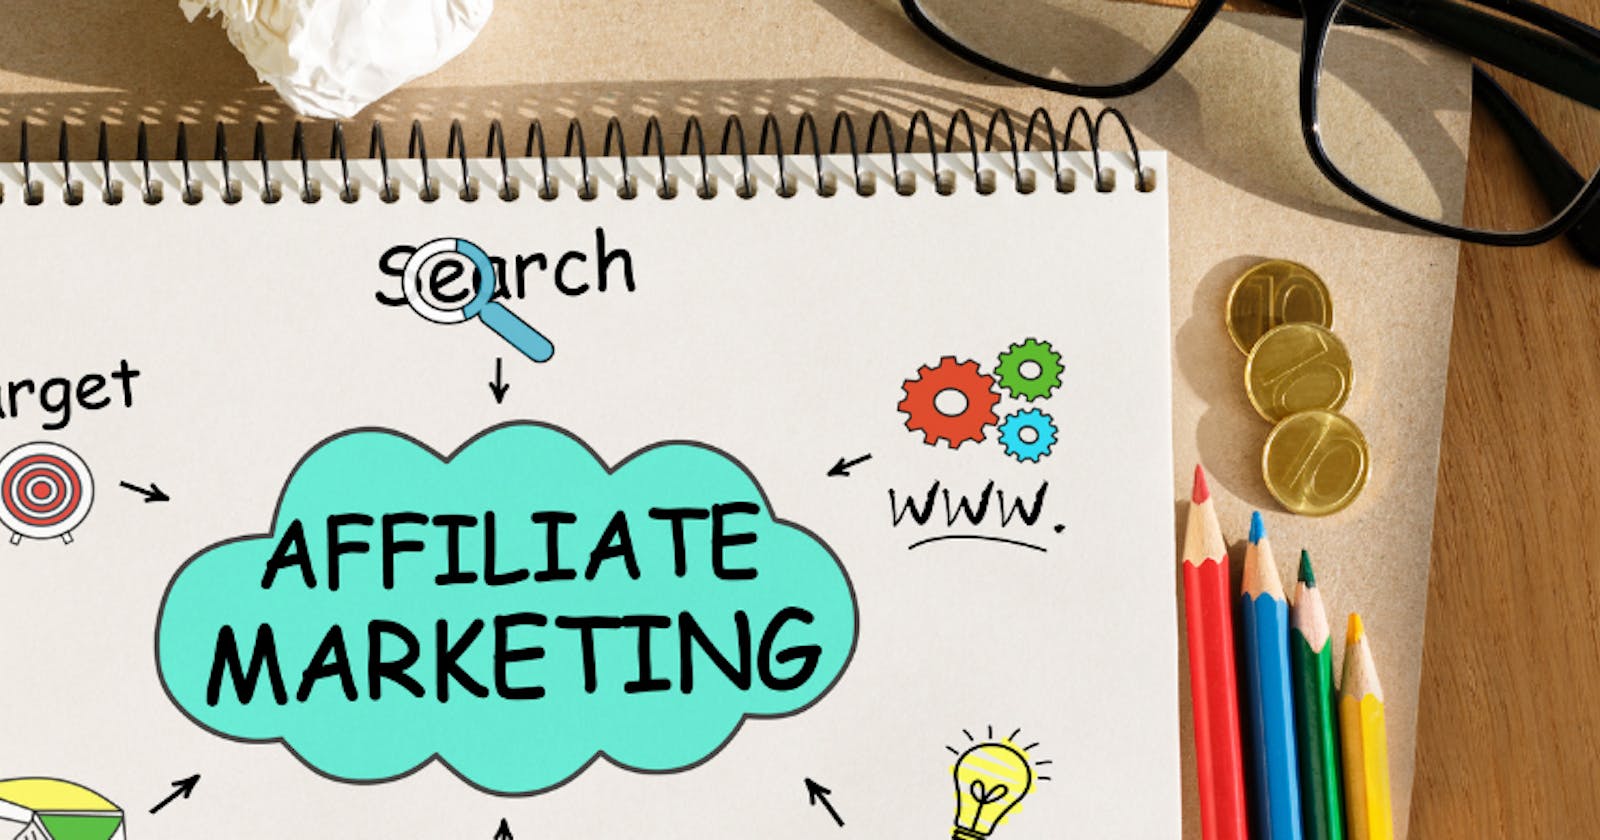 How is Web hosting Important for Affiliate Marketing?